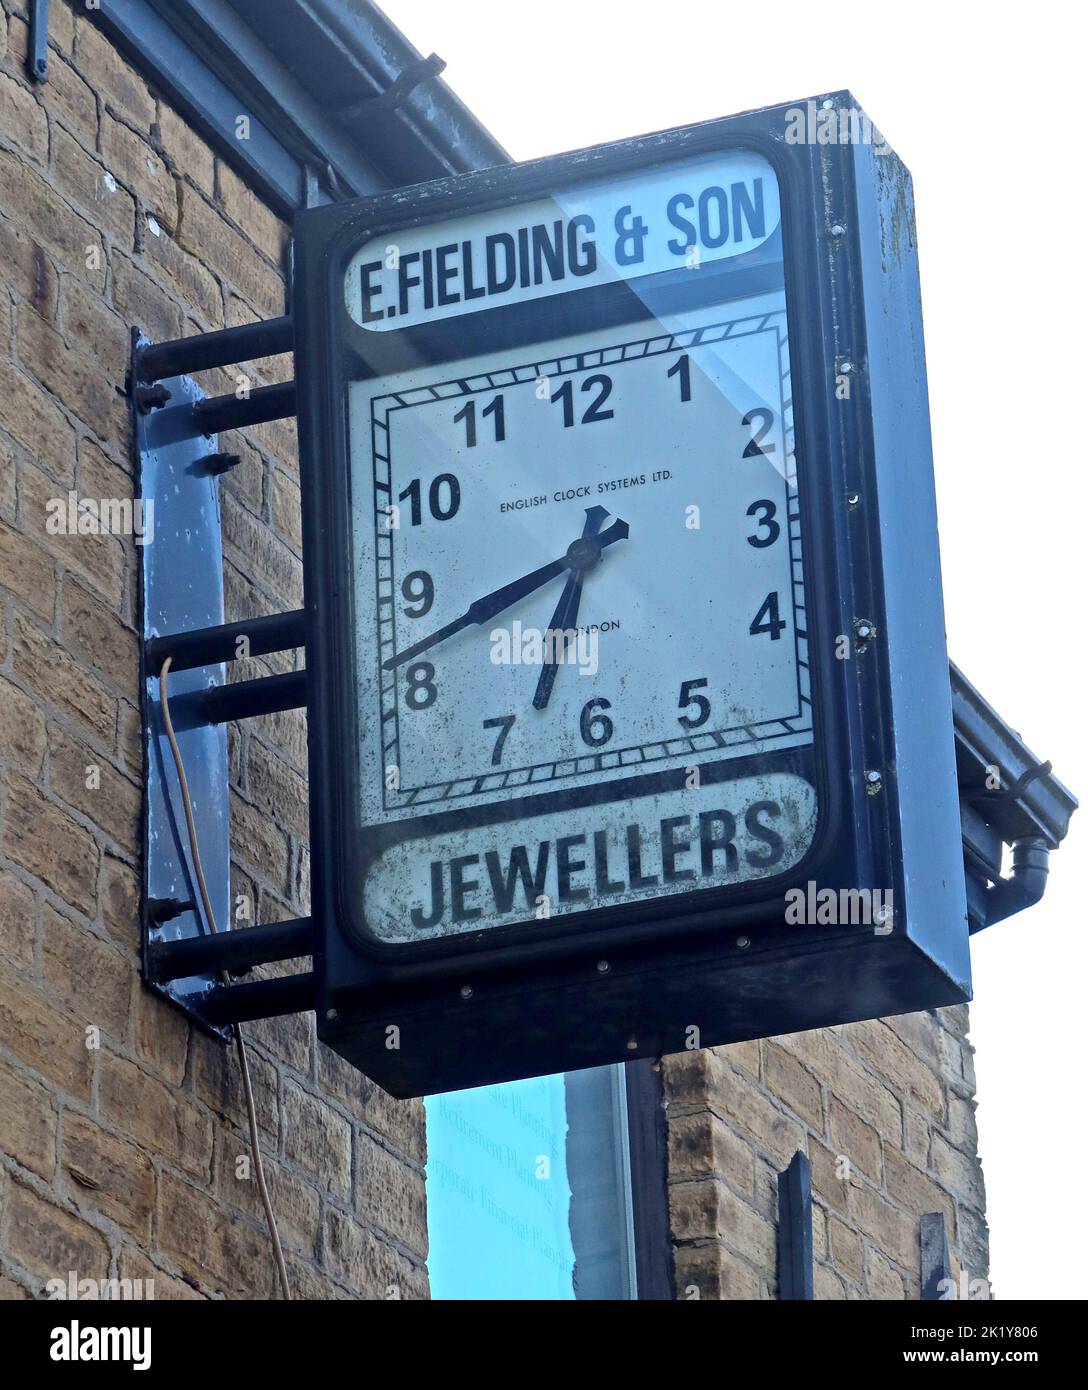 E. Fielding and Son Jewellers Clock Systems, Electric Clock Systems, 39 High St W, Glossop, High Peak, Derbyshire, England, UK, SK13 8AZ Stockfoto